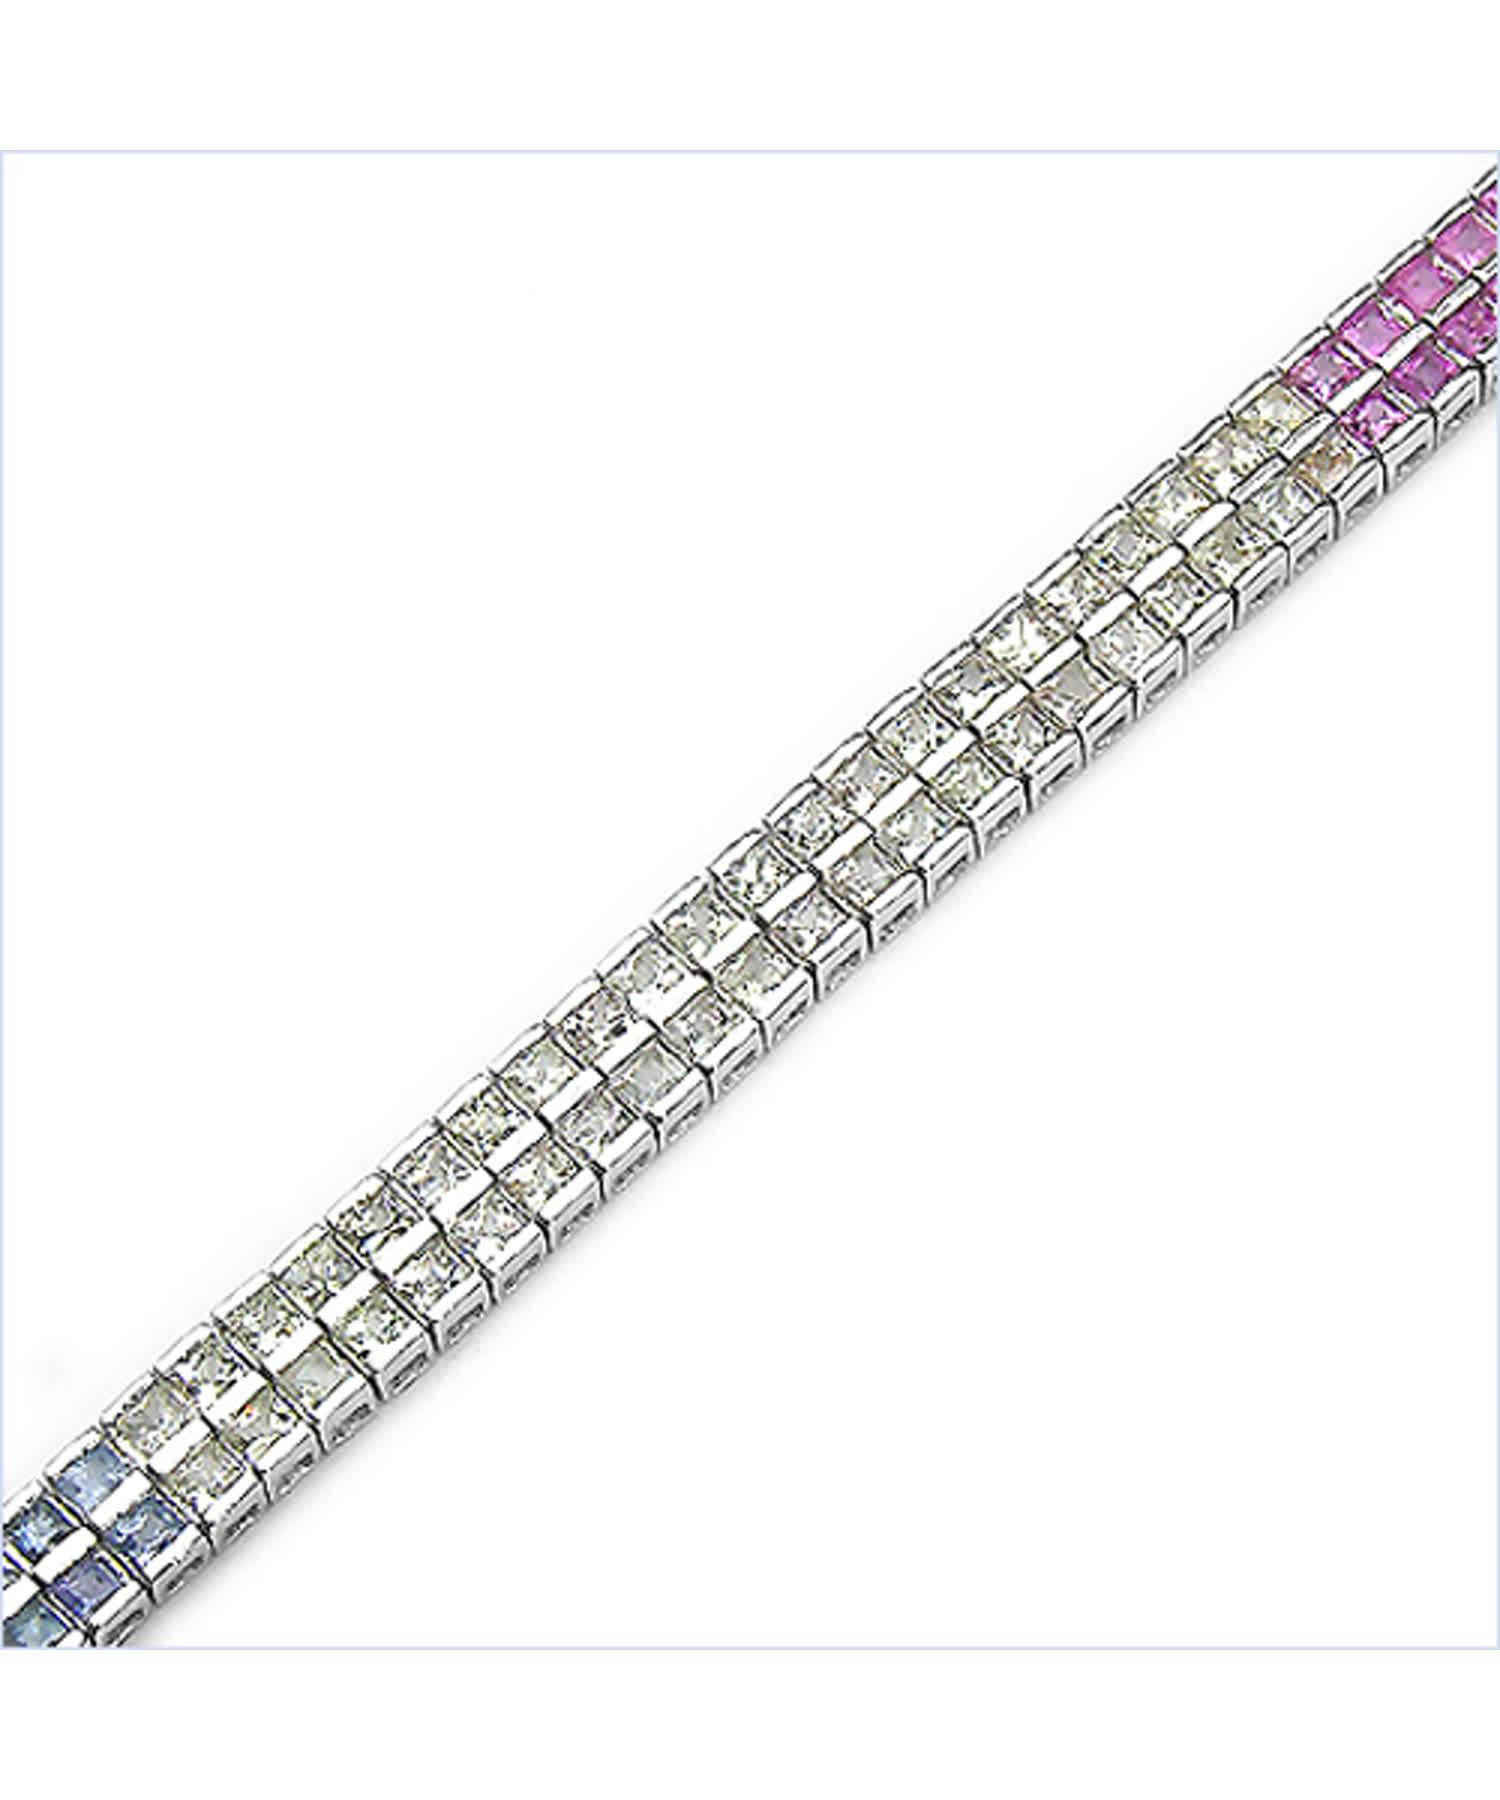 9.52ctw Natural Sapphire Rhodium Plated 925 Sterling Silver Tennis Bracelet View 2